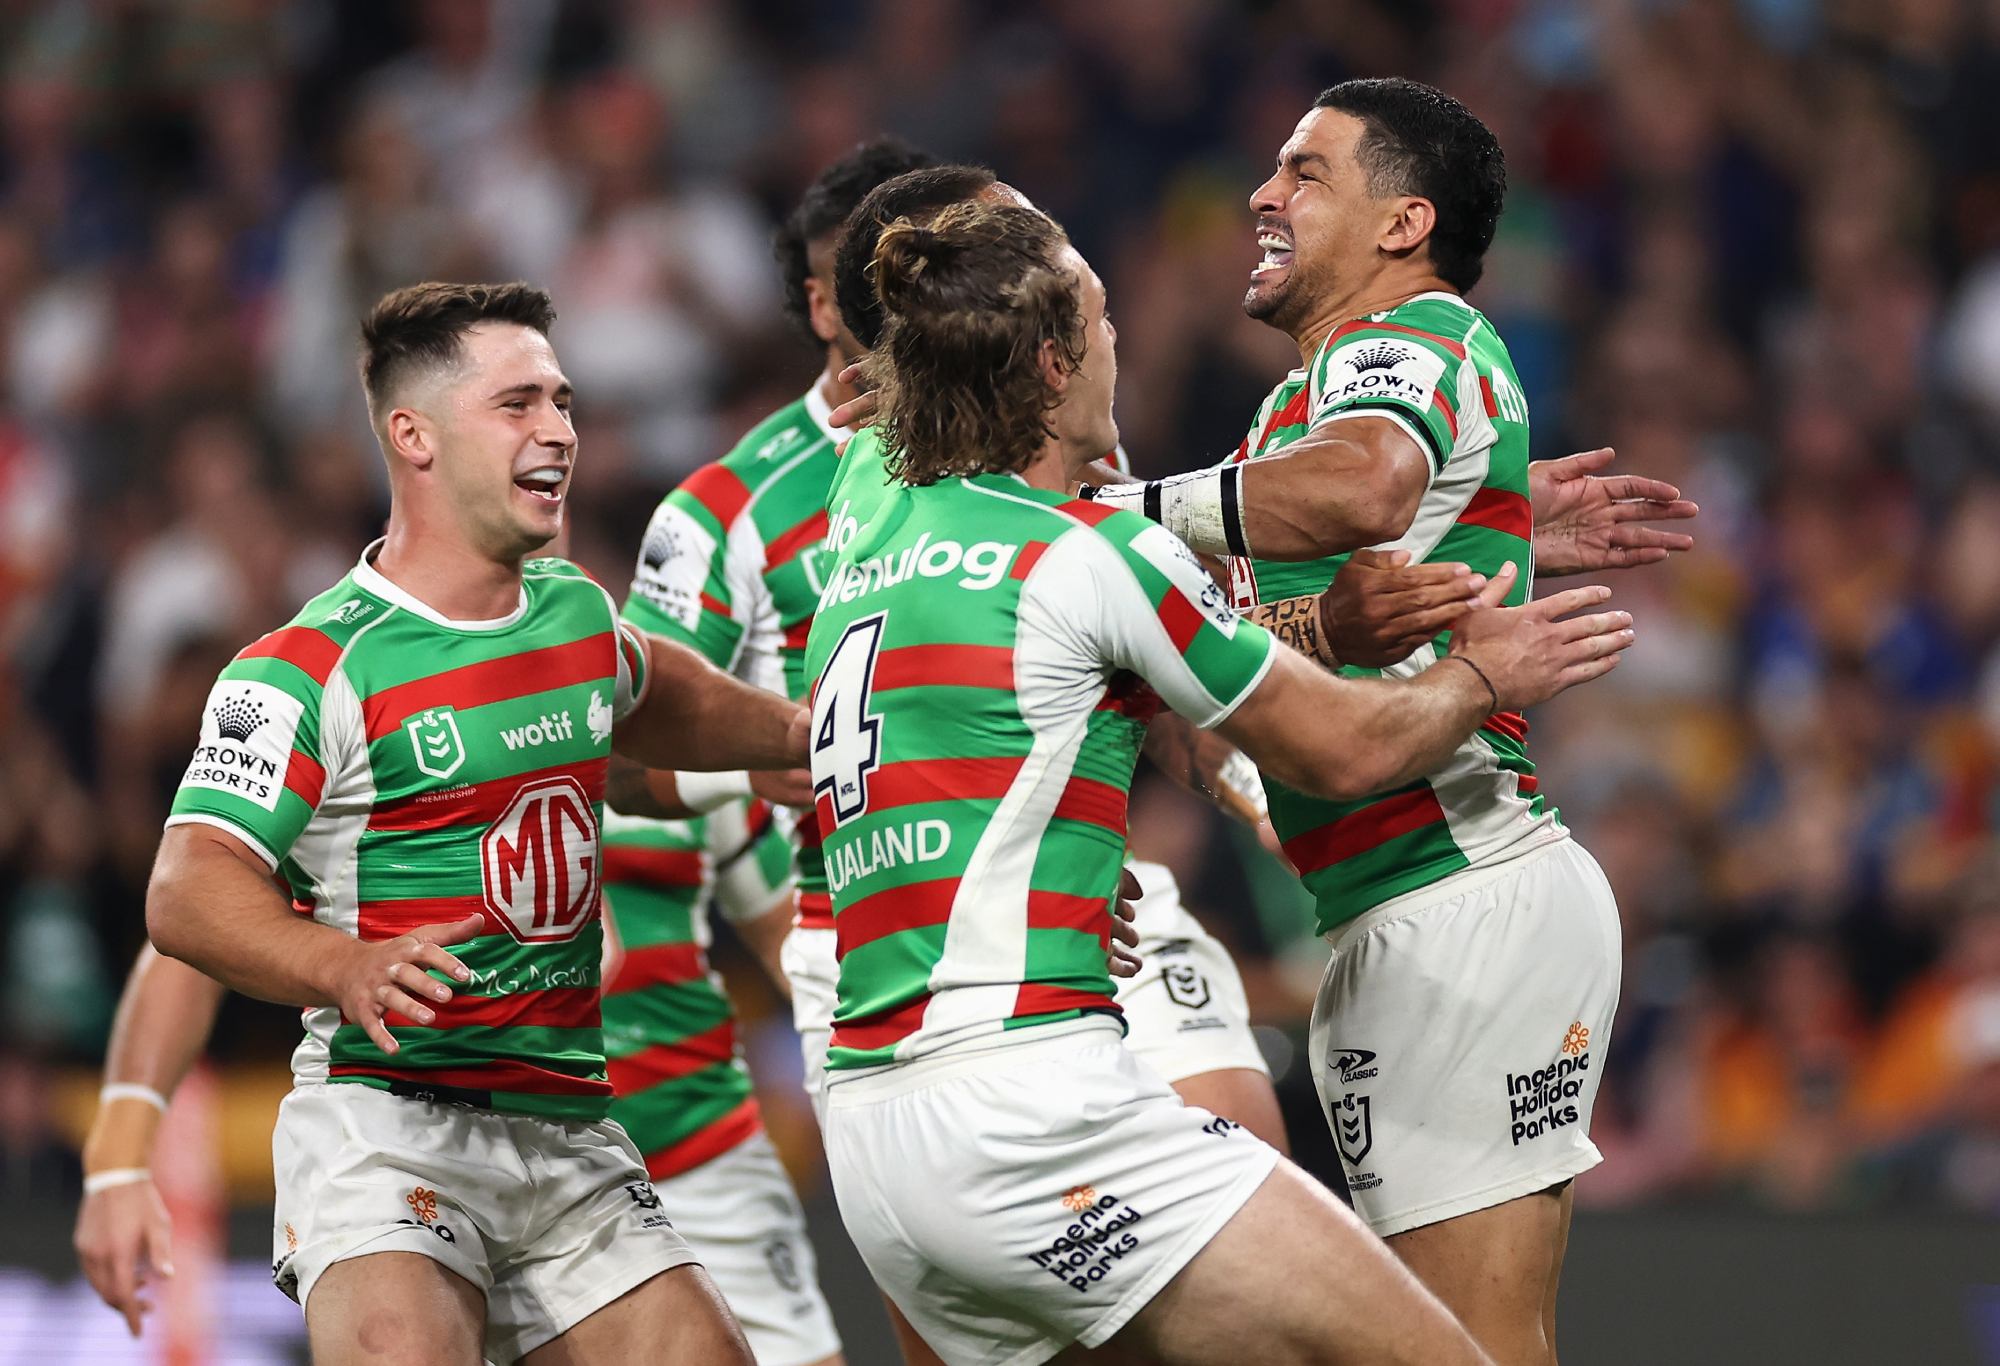 BRISBANE, AUSTRALIA - MAY 06: Cody Walker of the Rabbitohs celebrates scoring a try with team mates during the round 10 NRL match between Melbourne Storm and South Sydney Rabbitohs at Suncorp Stadium on May 06, 2023 in Brisbane, Australia. (Photo by Cameron Spencer/Getty Images)